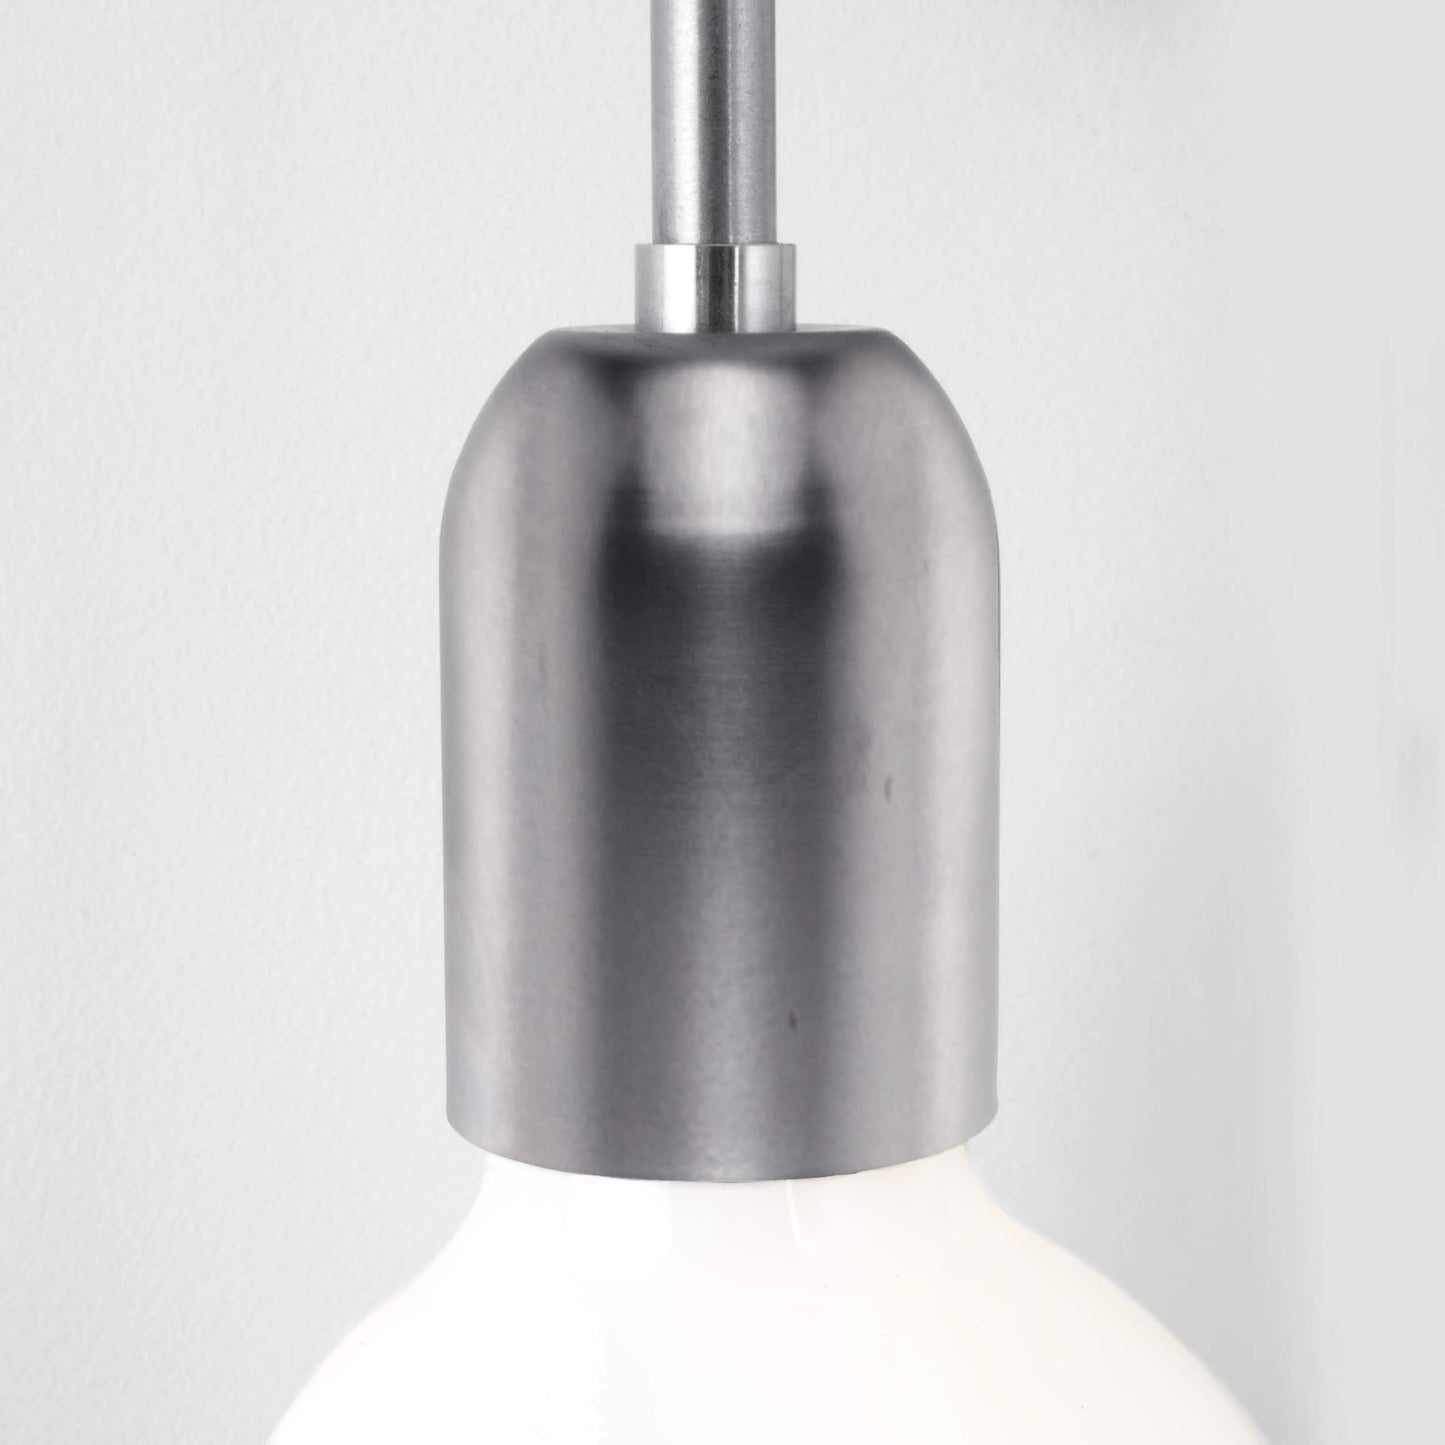 Customize: 5-Arm Bend Plug-In Chandelier